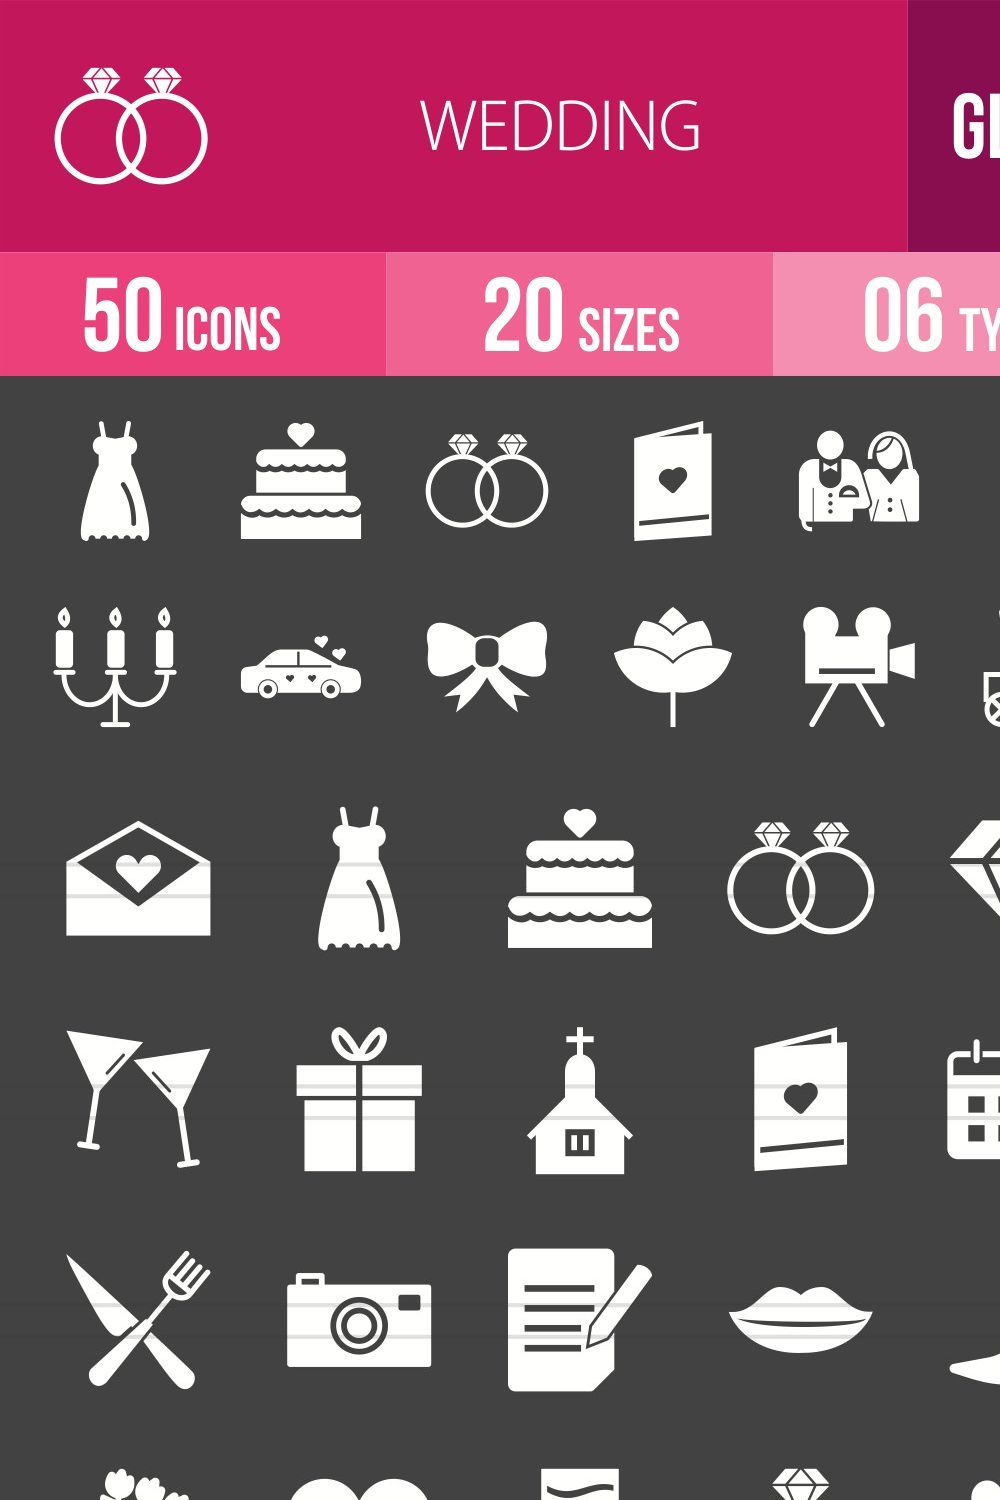 50 Wedding Glyph Inverted Icons pinterest preview image.